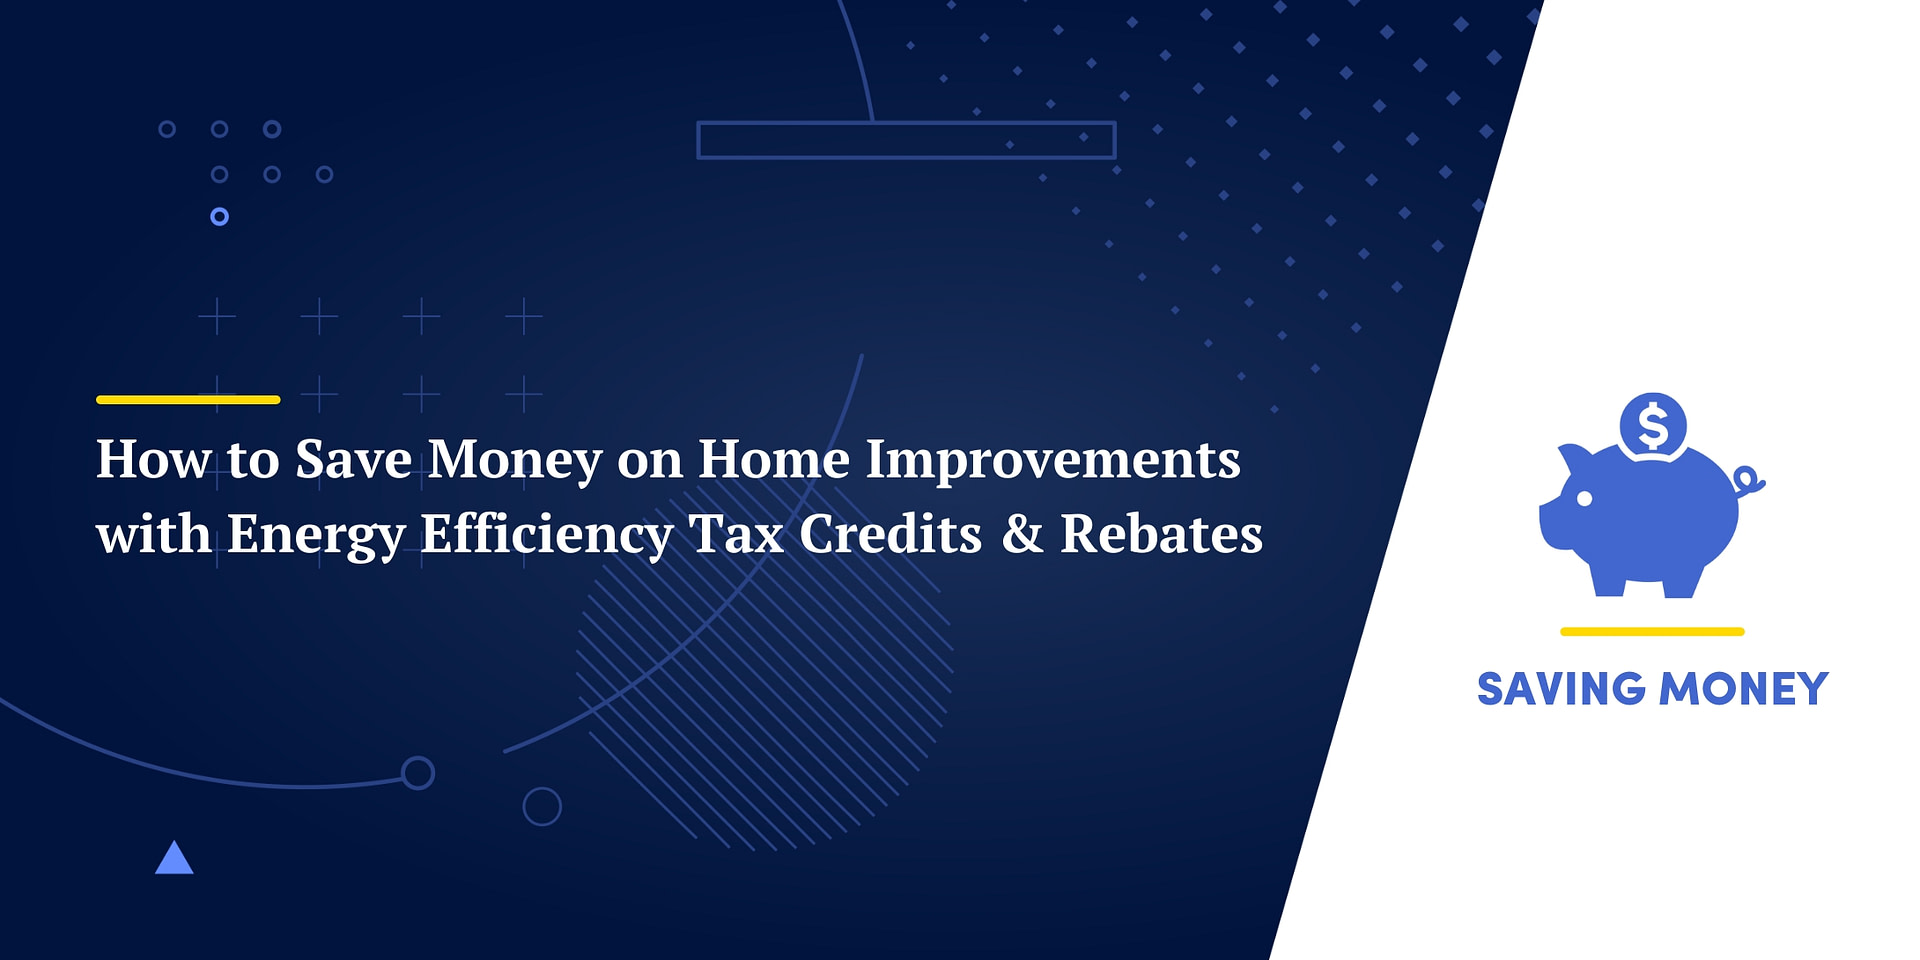 how-to-save-money-on-home-improvements-with-energy-efficiency-tax-credits-rebates